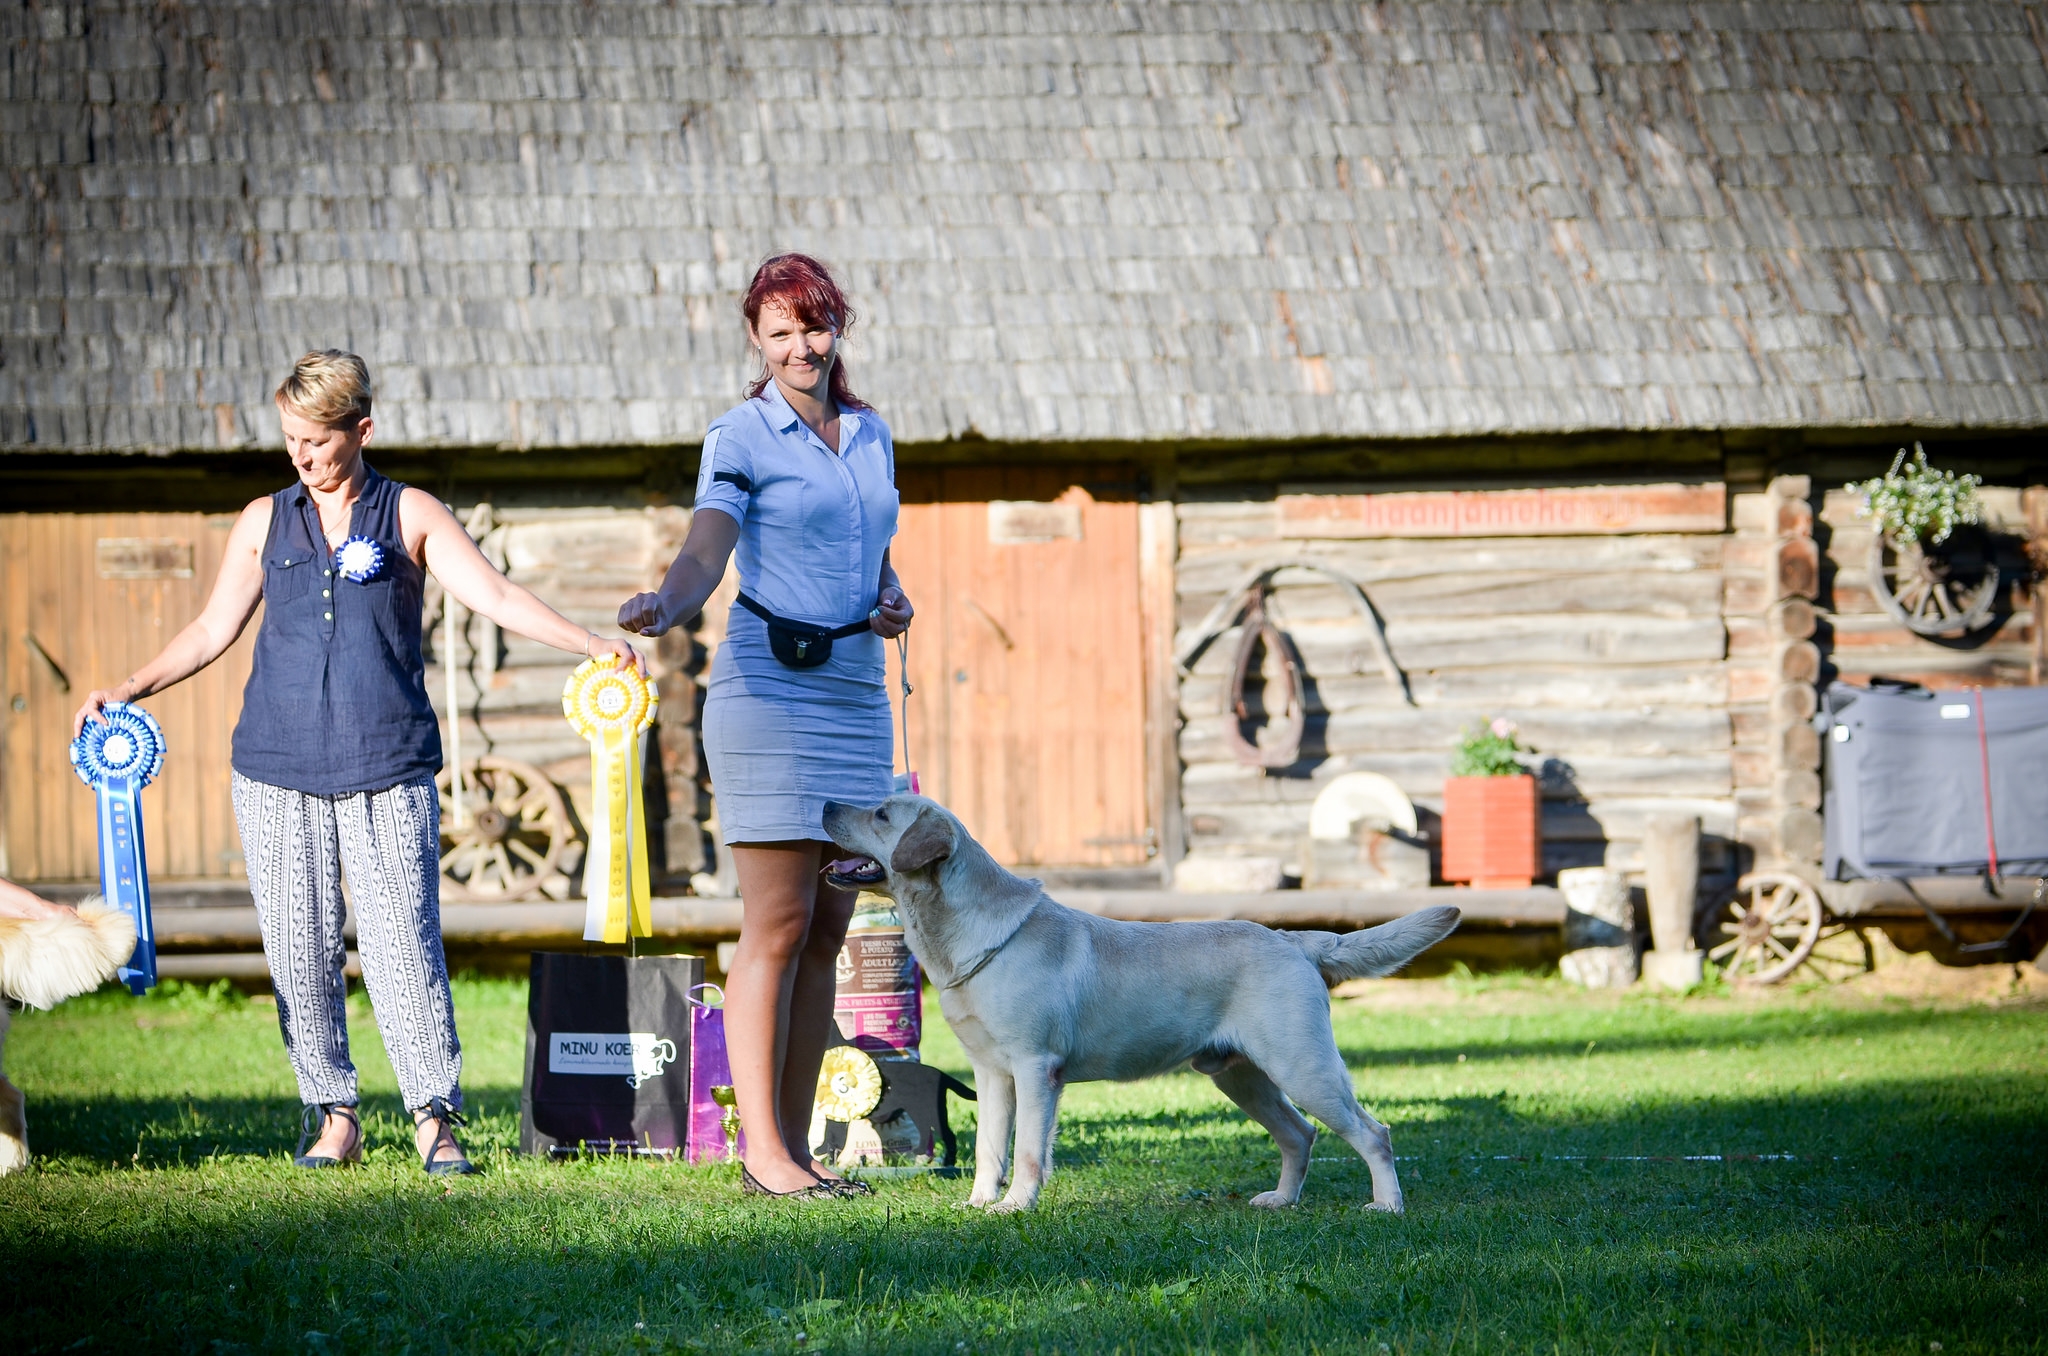 BIS-3 at the Retriever Specialty 2016 in Southern Estonia, judged by Mary Neil. Photo by Sodelight Photography.